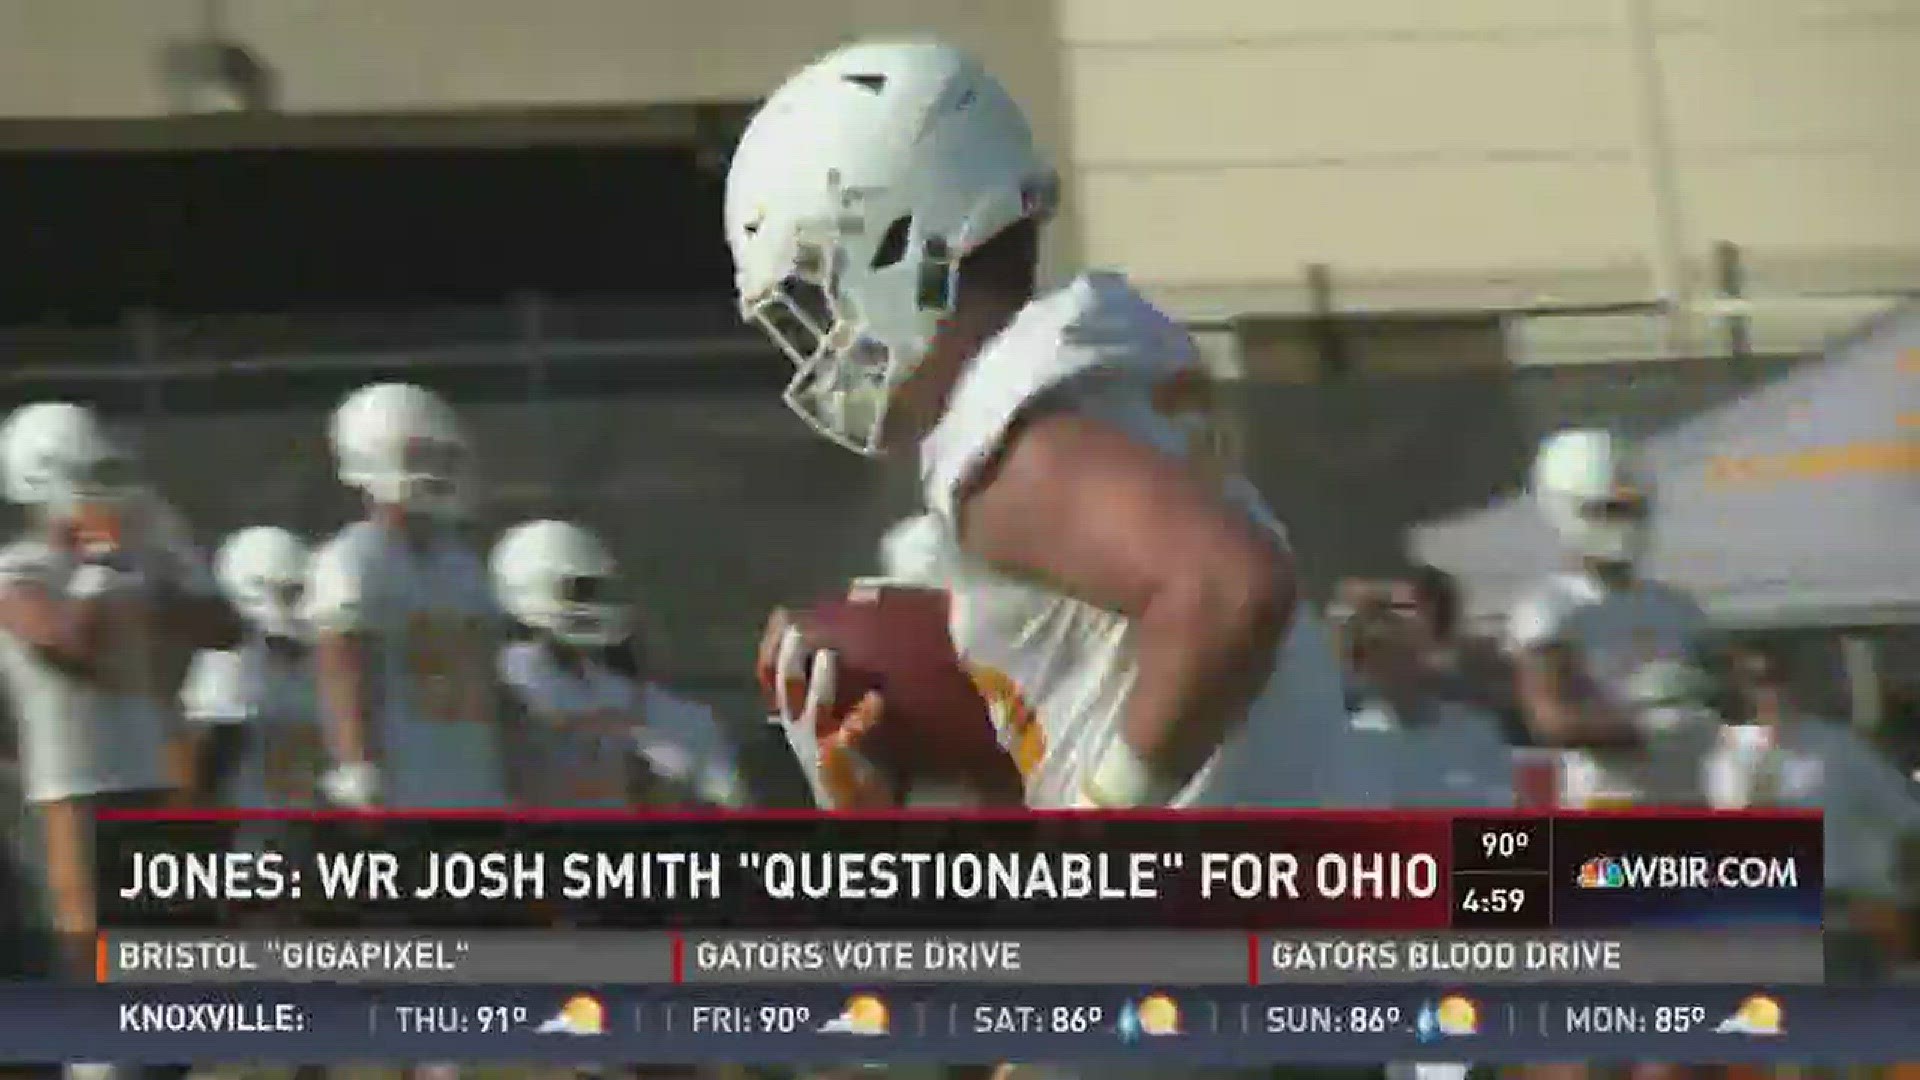 Tennessee Vols wide receiver Josh Smith is questionable for Saturday's game against Ohio.